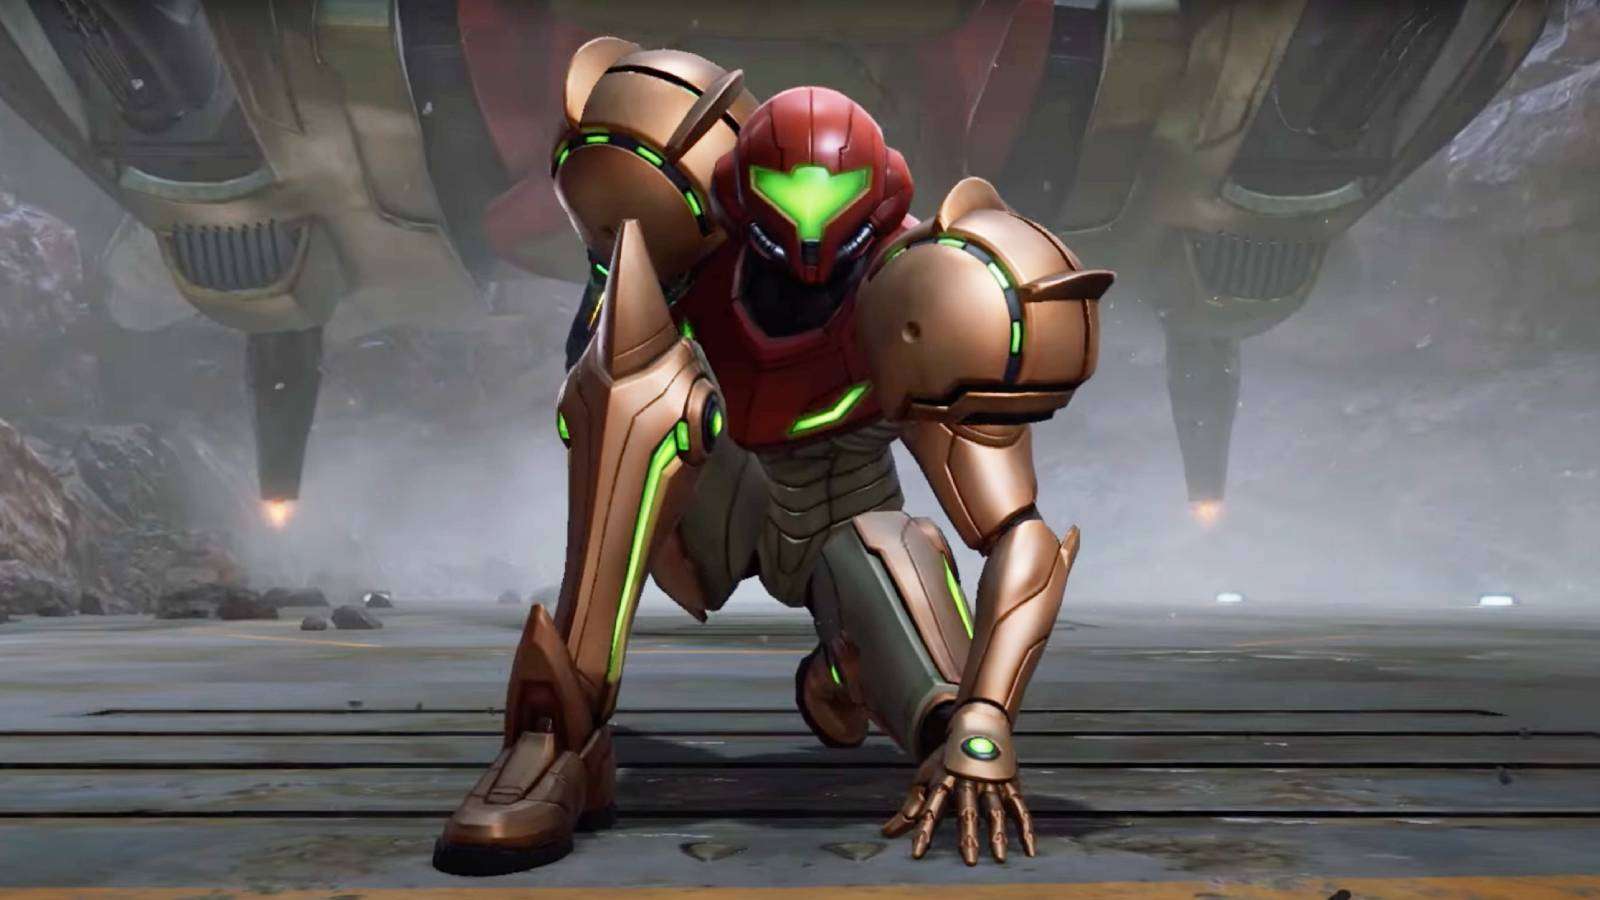 A screenshot from Metroid Prime 4 shows Samus Aran jumping out of her gunship and landing crouched on the ground